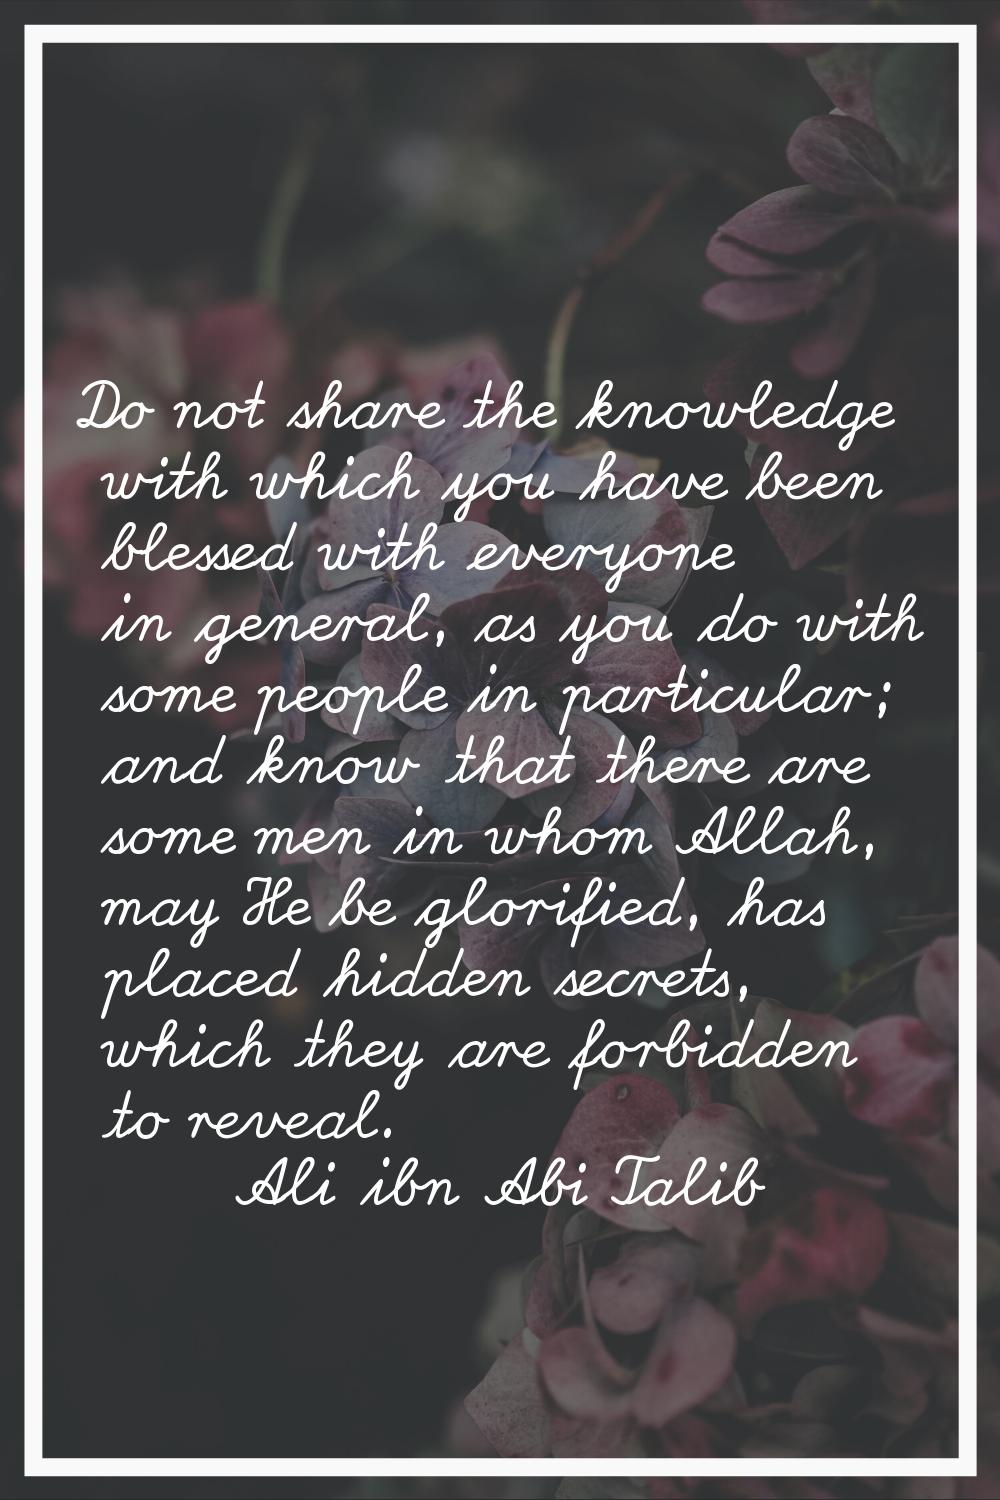 Do not share the knowledge with which you have been blessed with everyone in general, as you do wit